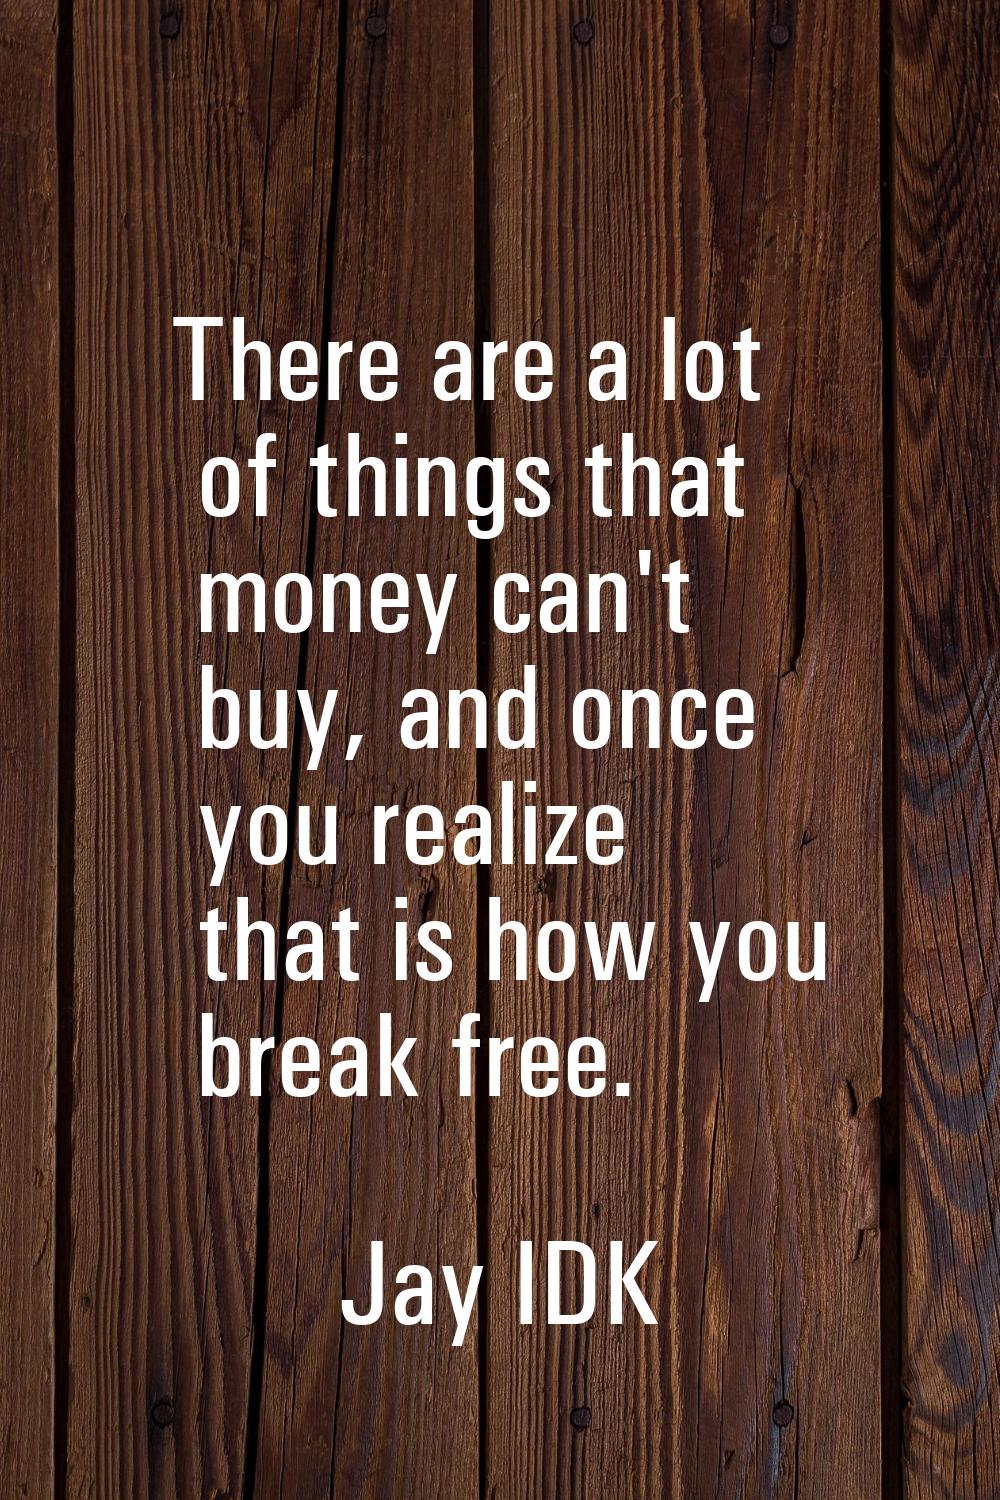 There are a lot of things that money can't buy, and once you realize that is how you break free.